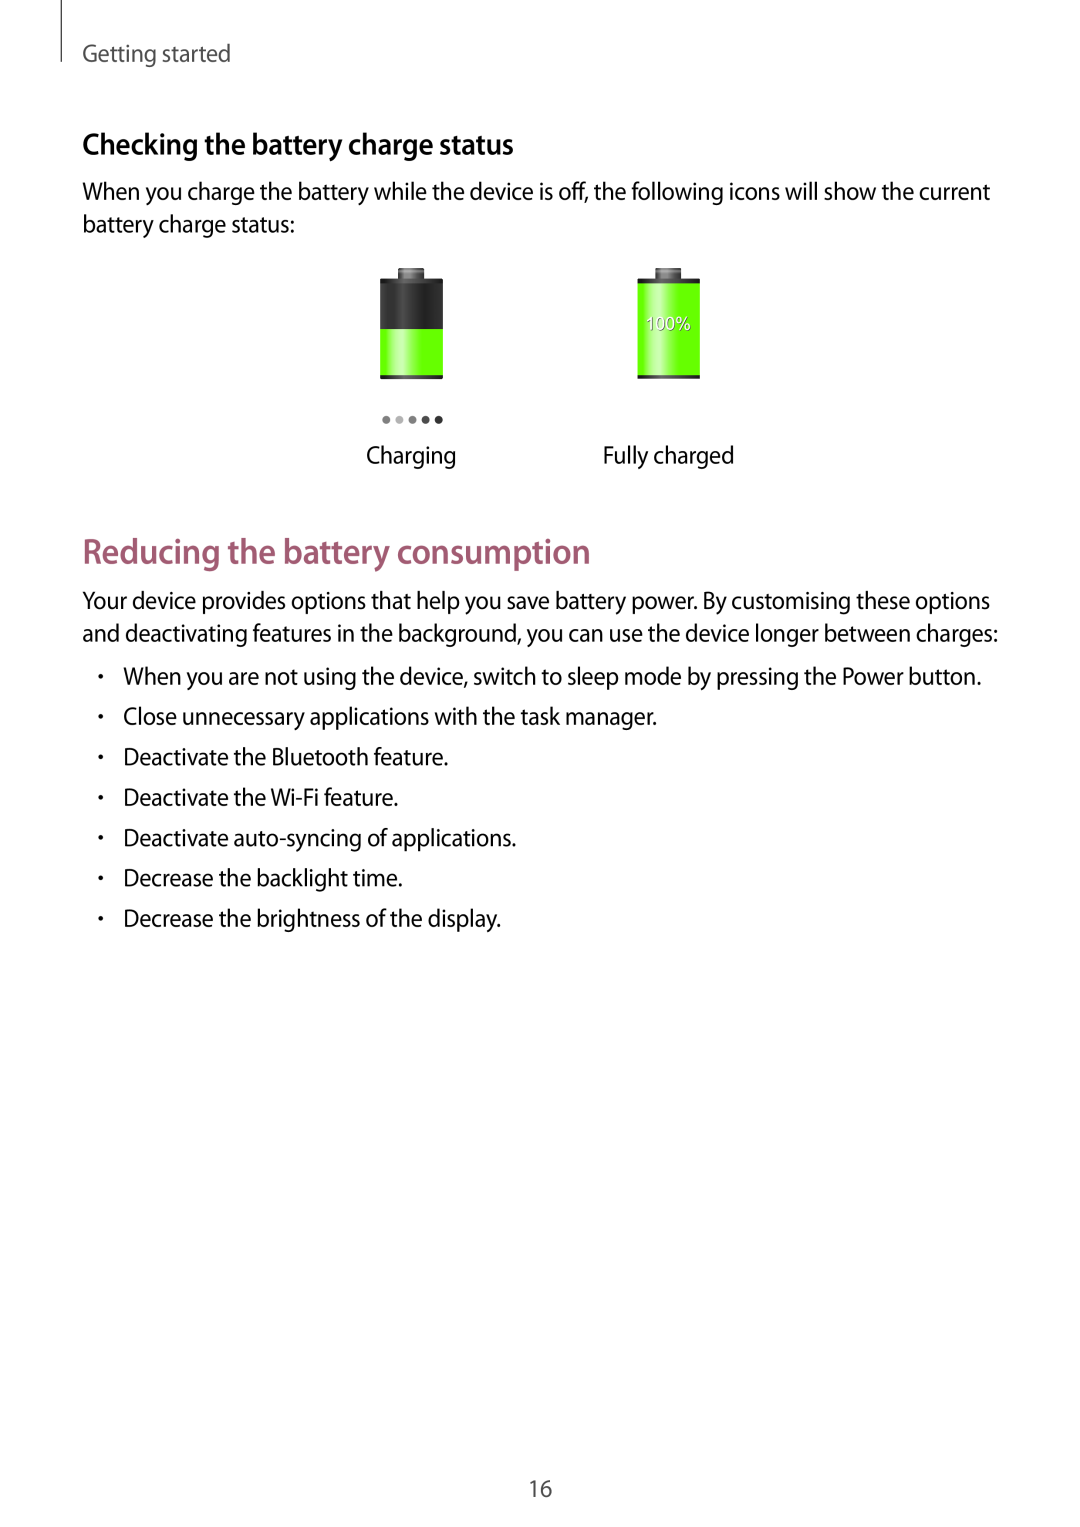 Samsung SM-N9005ZREKSA manual Reducing the battery consumption, Checking the battery charge status, Getting started 